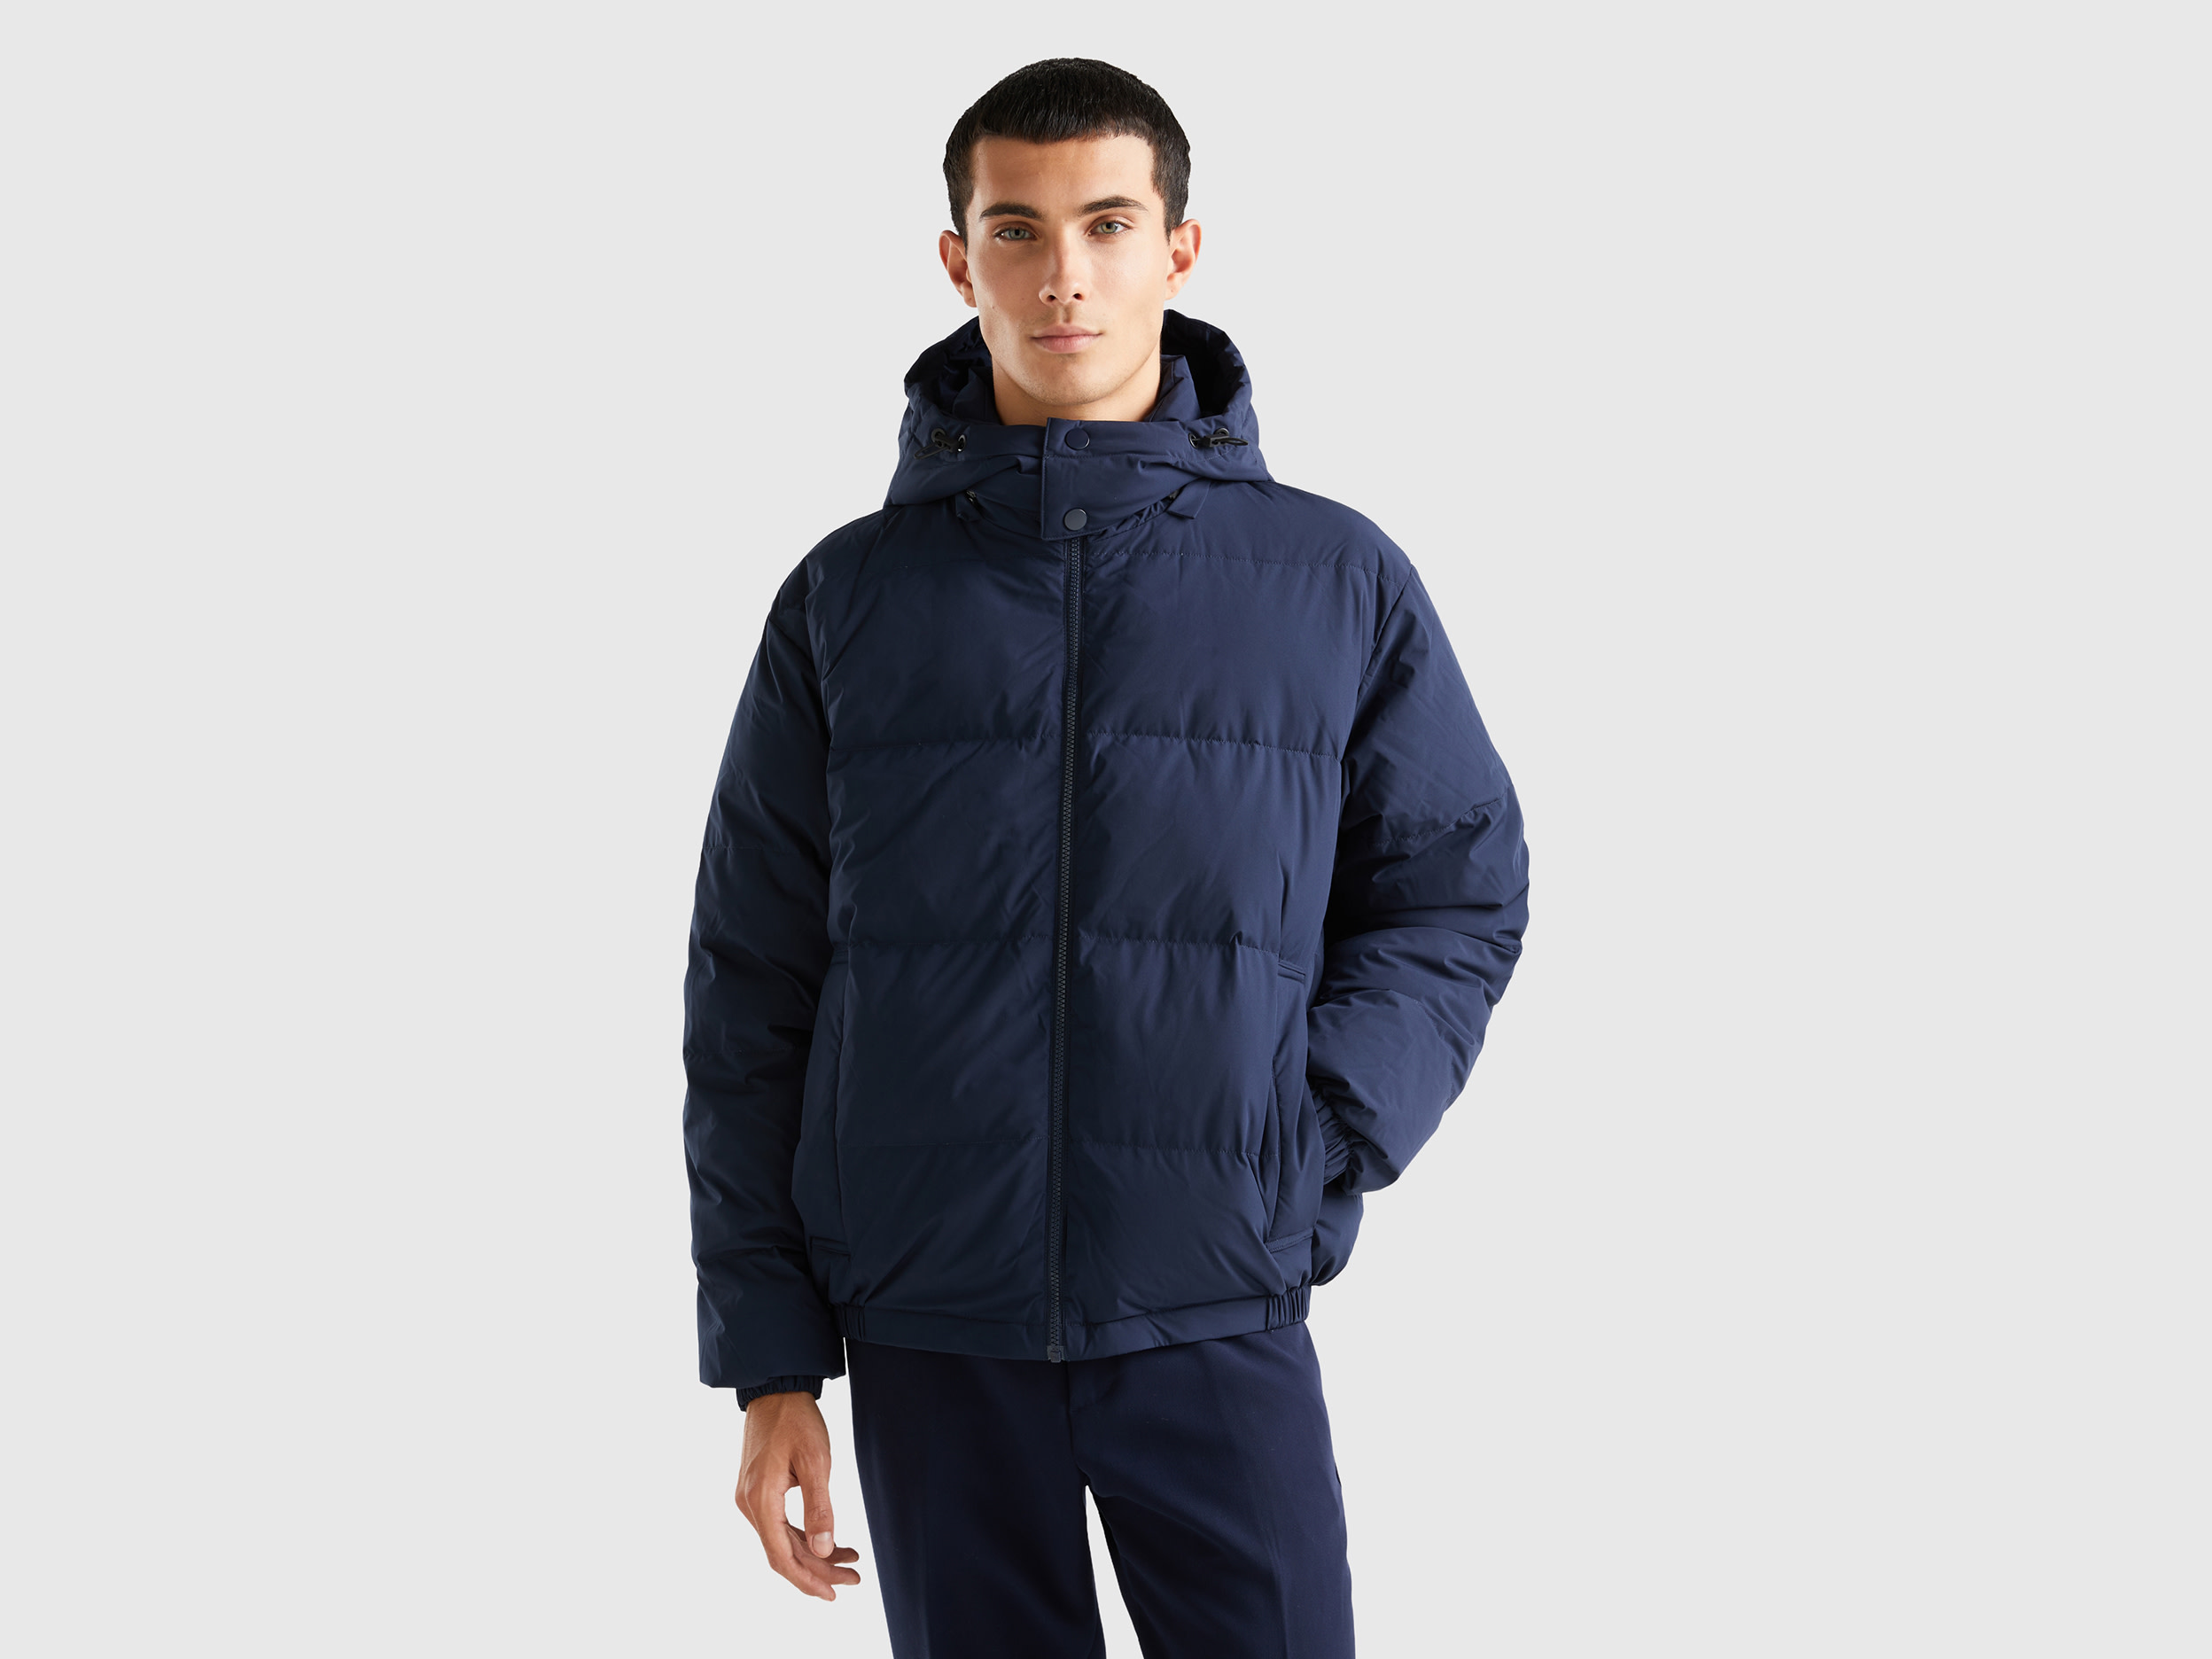 Benetton, Padded Jacket With Removable Hood, size M, Dark Blue, Men